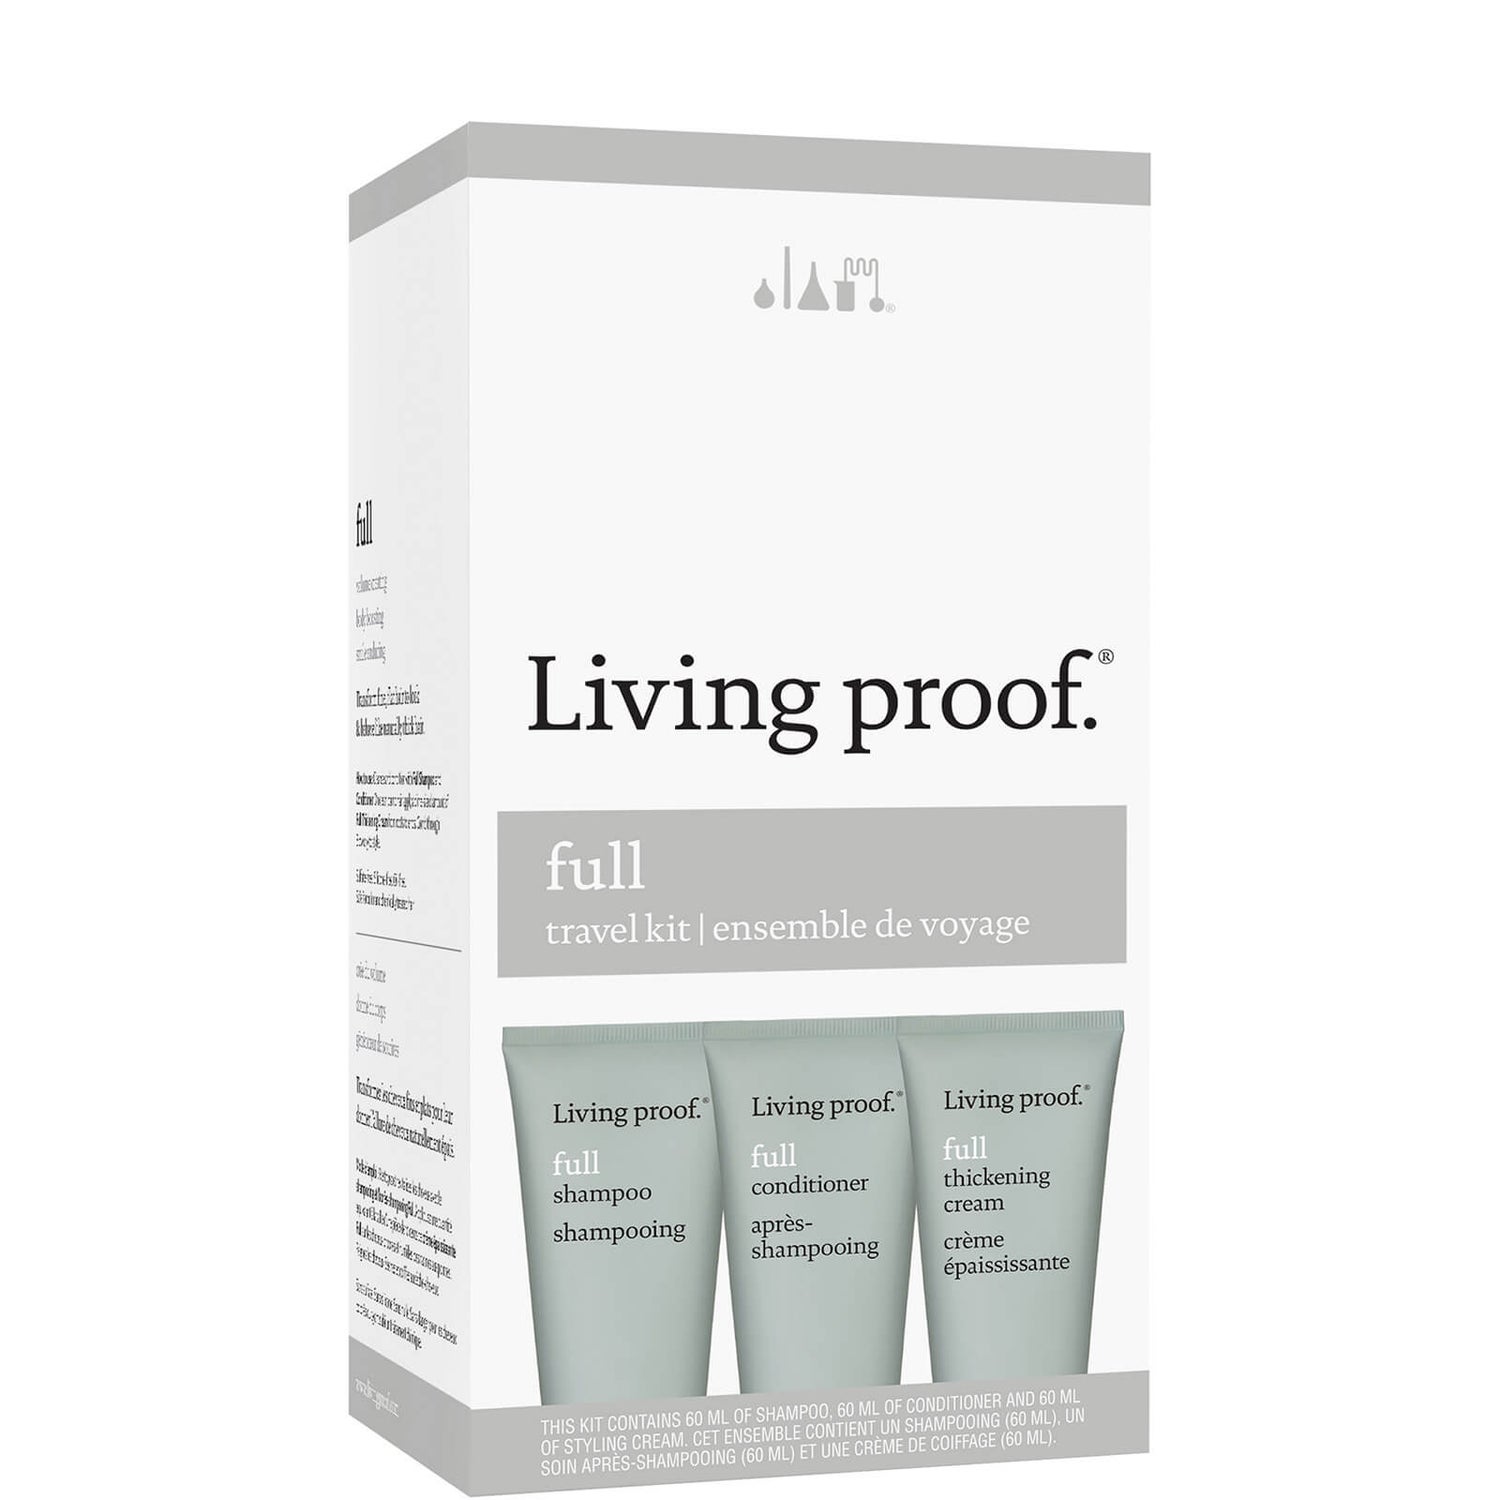 Living Proof Full Discovery Kit